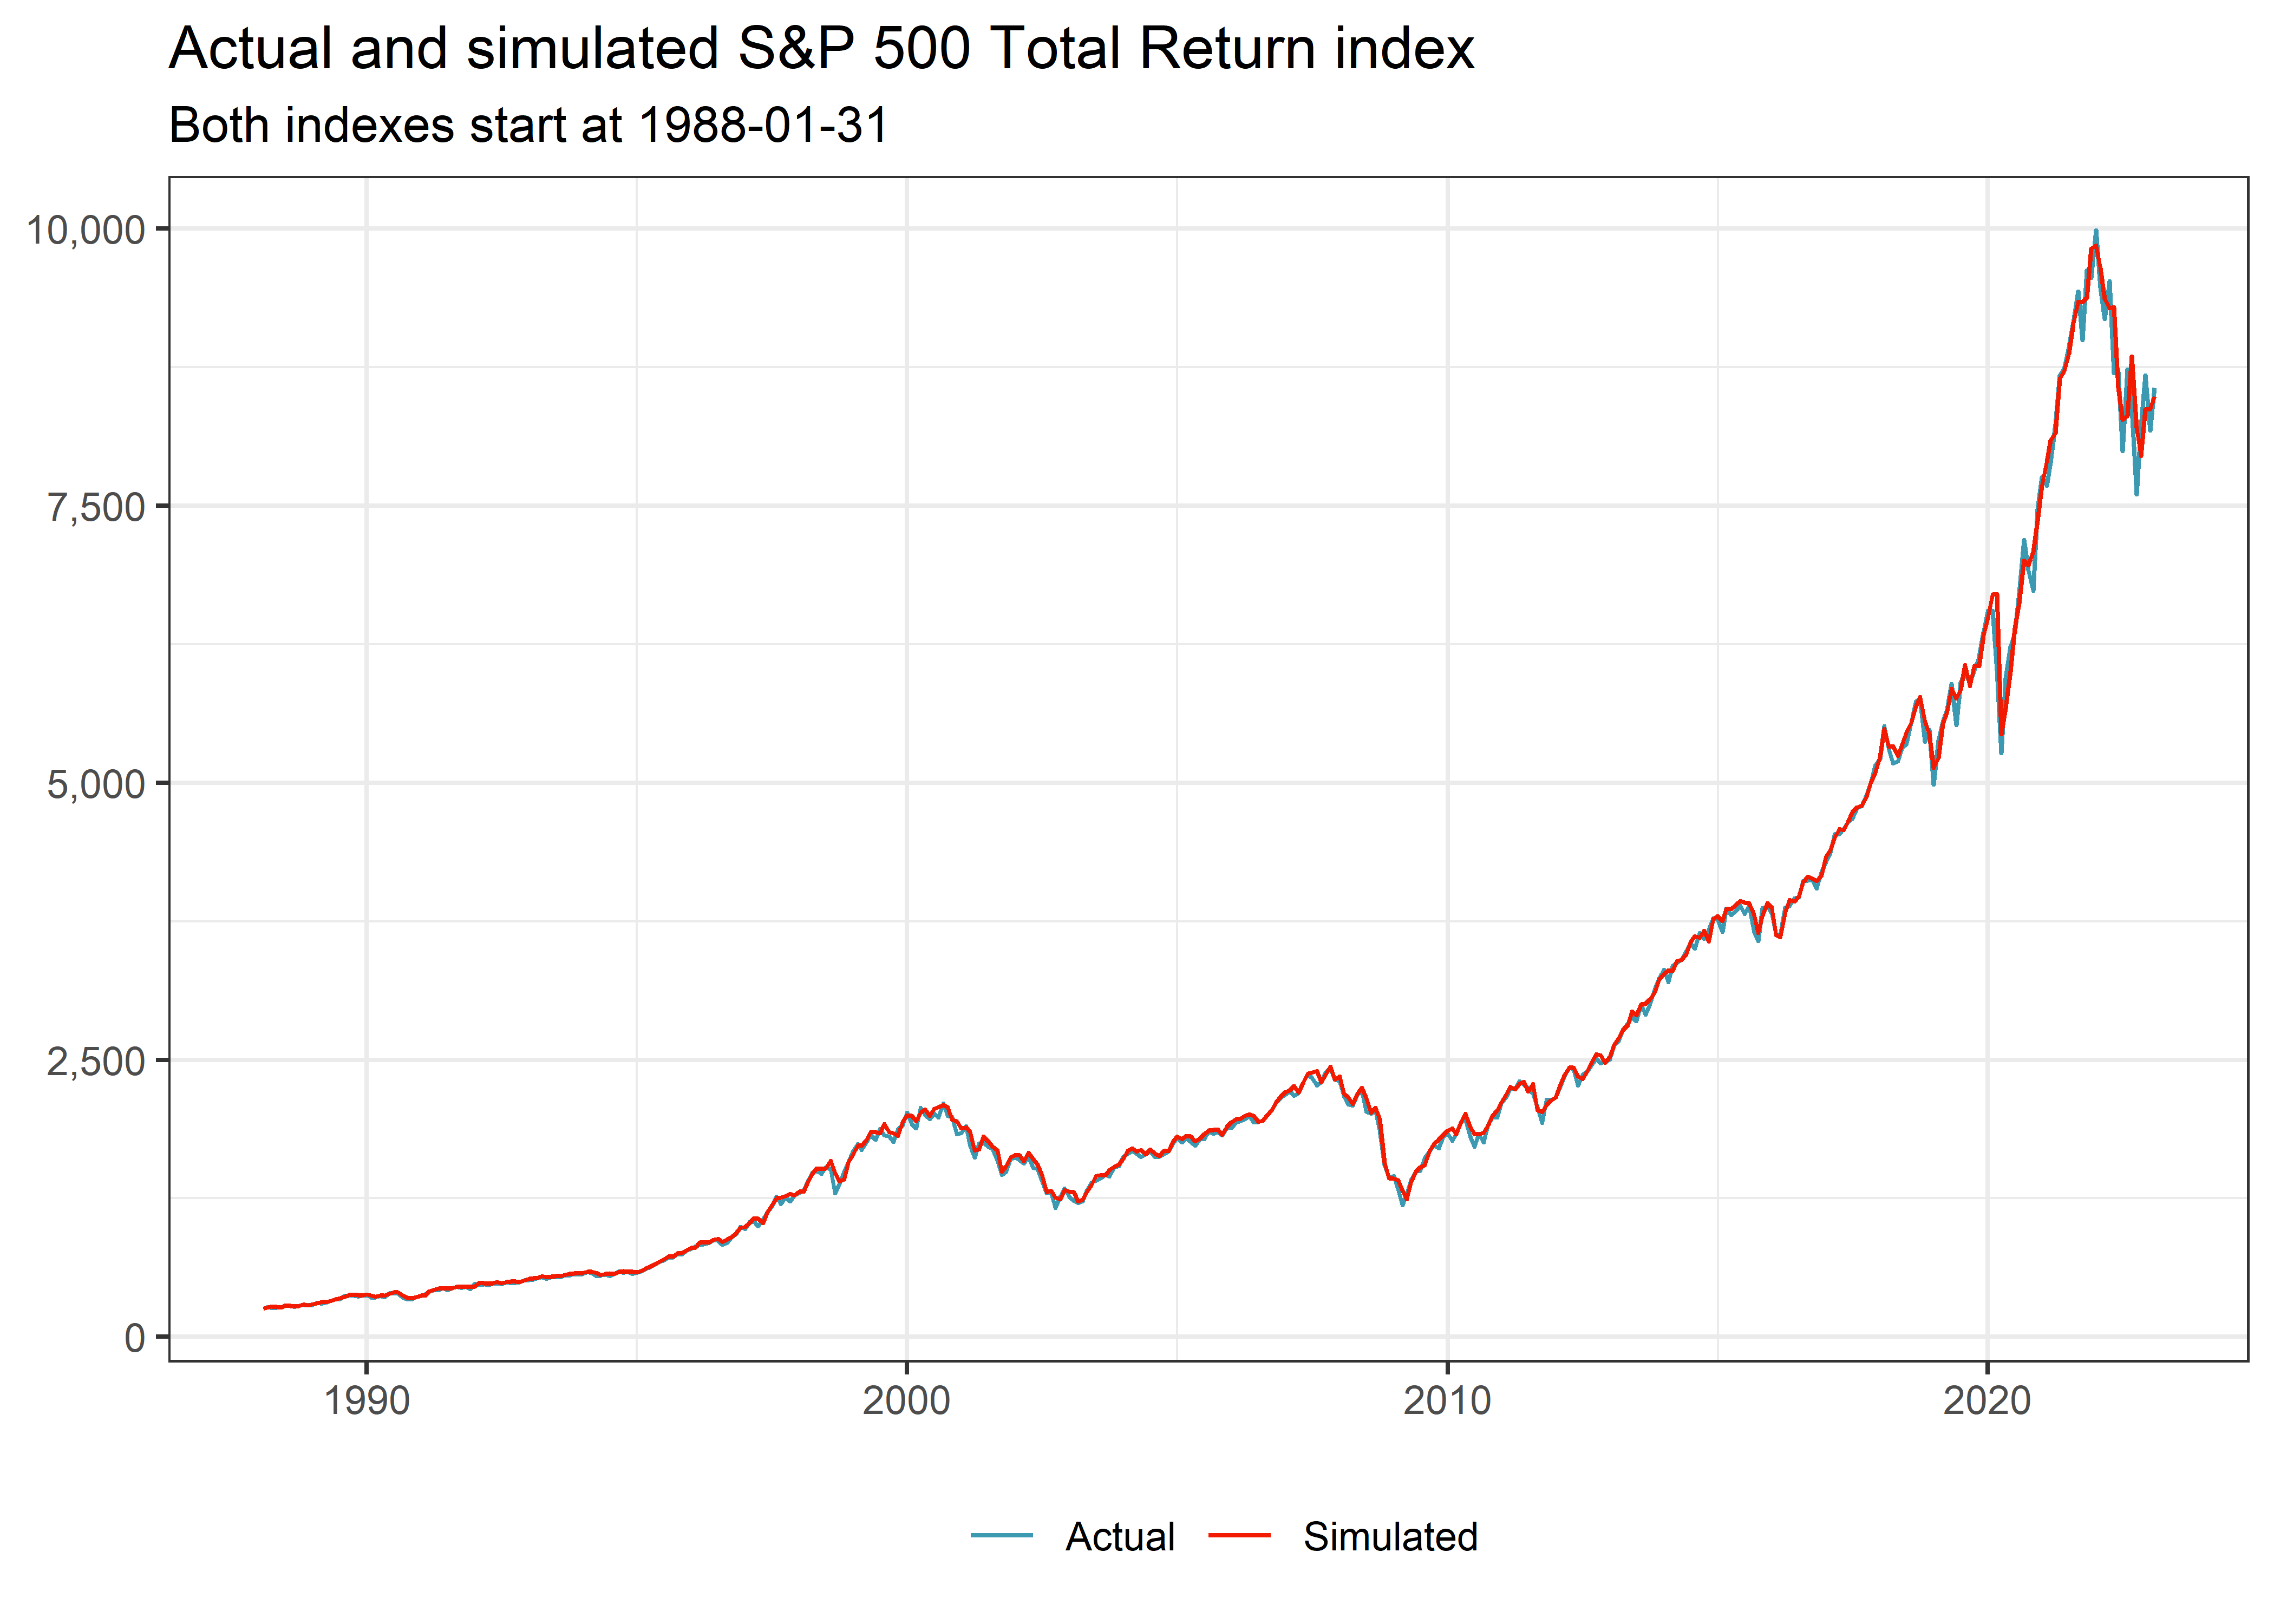 Title: Actual and simulated S&P 500 Total Return index. The figure shows that actual and simulated S&P 500 total return index data move very closely together.